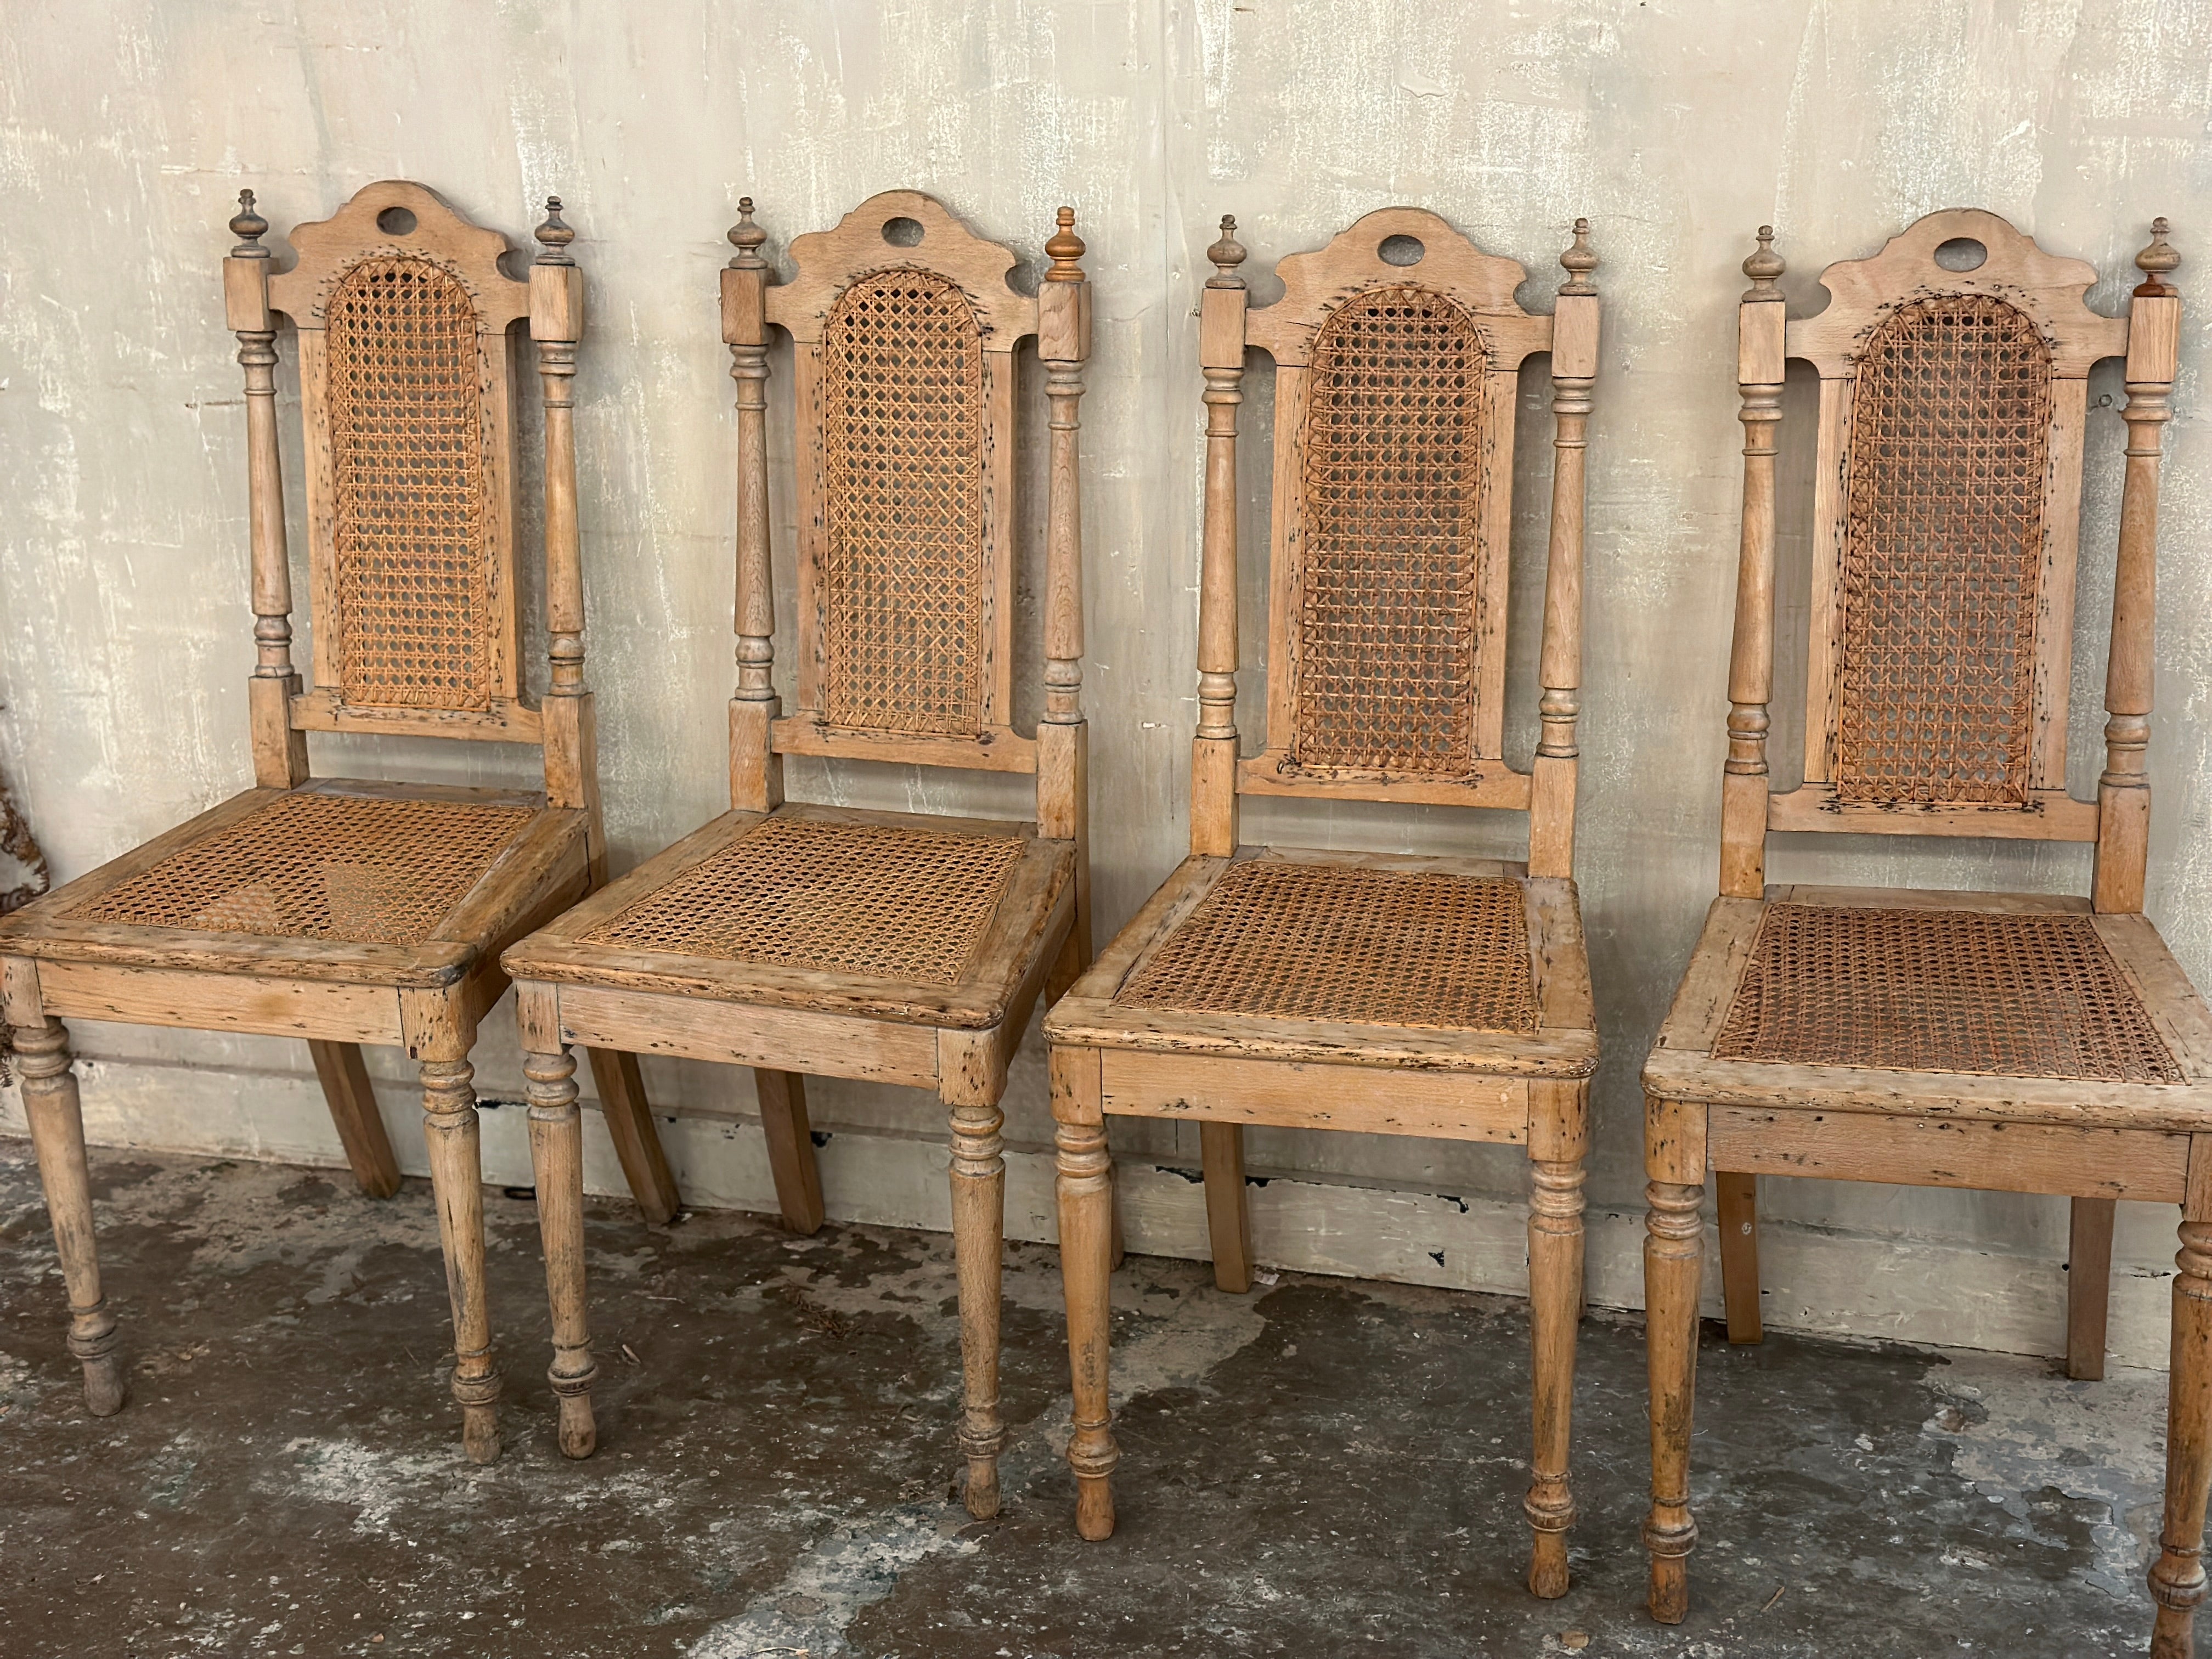 Set of 4 pine chairs